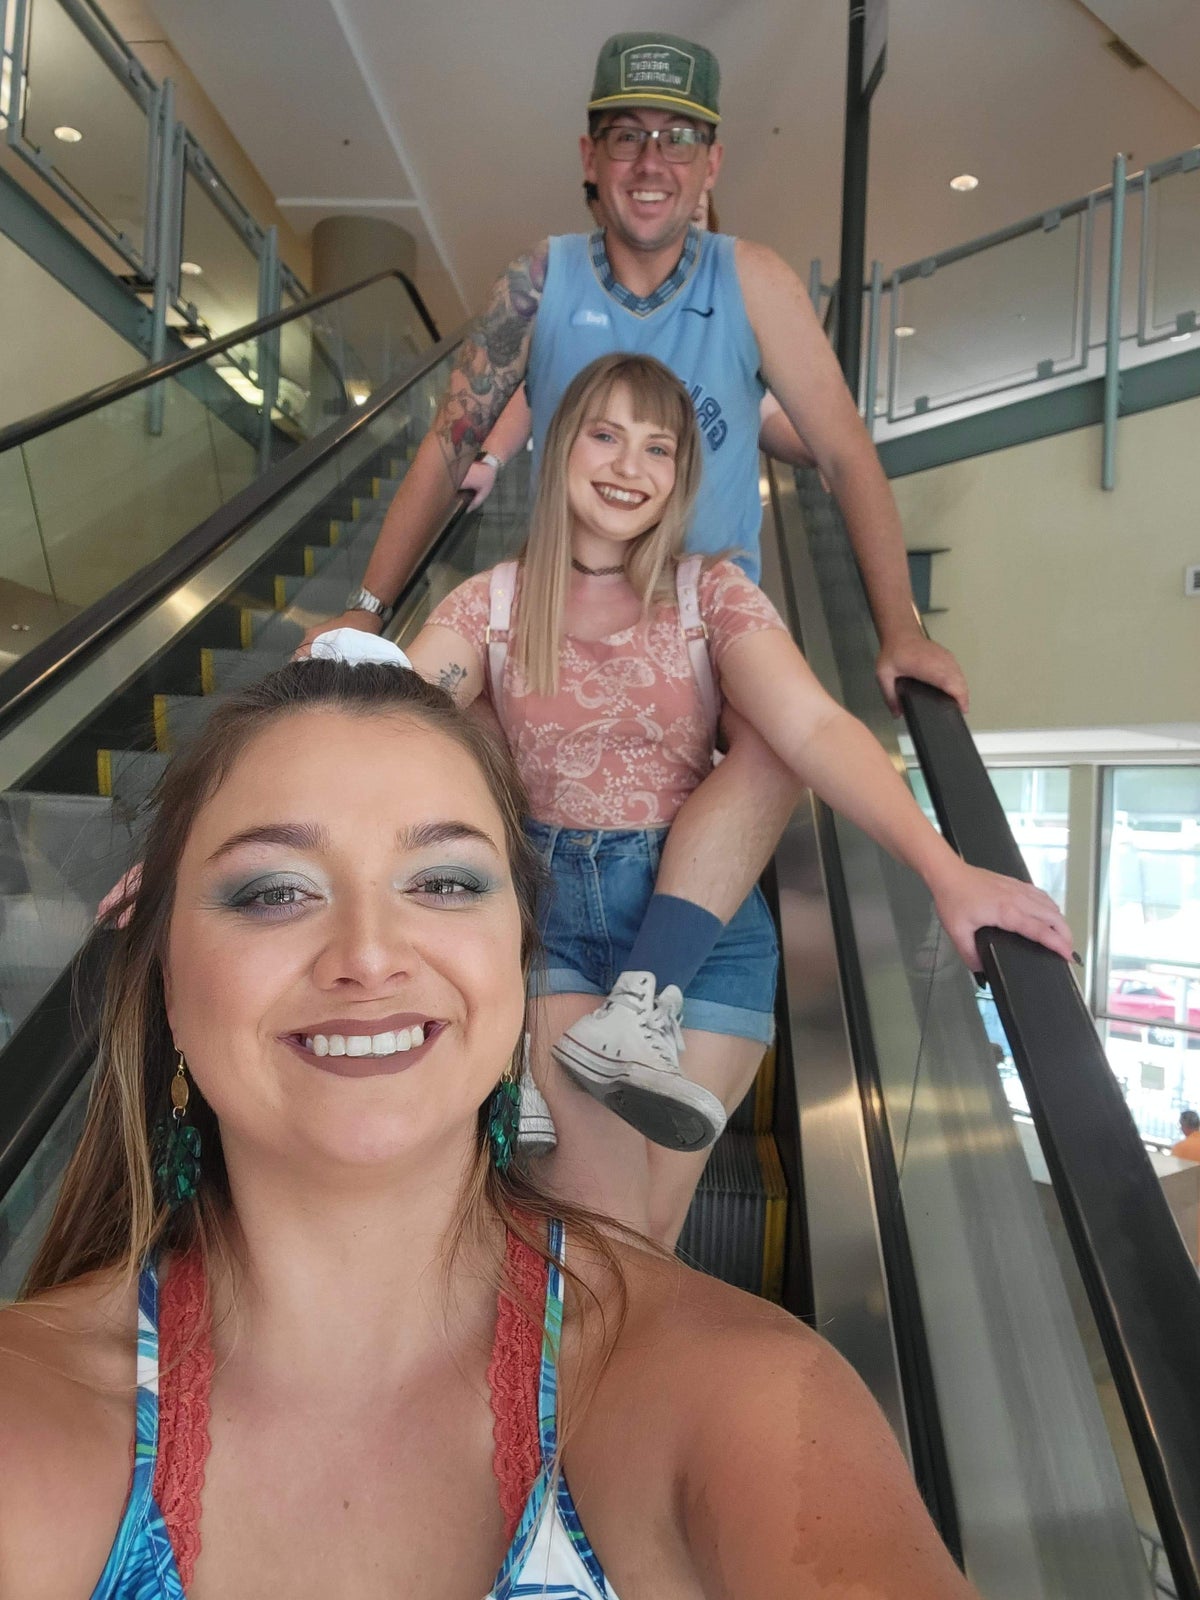 ‘They call us disgusting sinners’: Throuple who went viral after meeting on Tinder say strangers hoped they’d break up